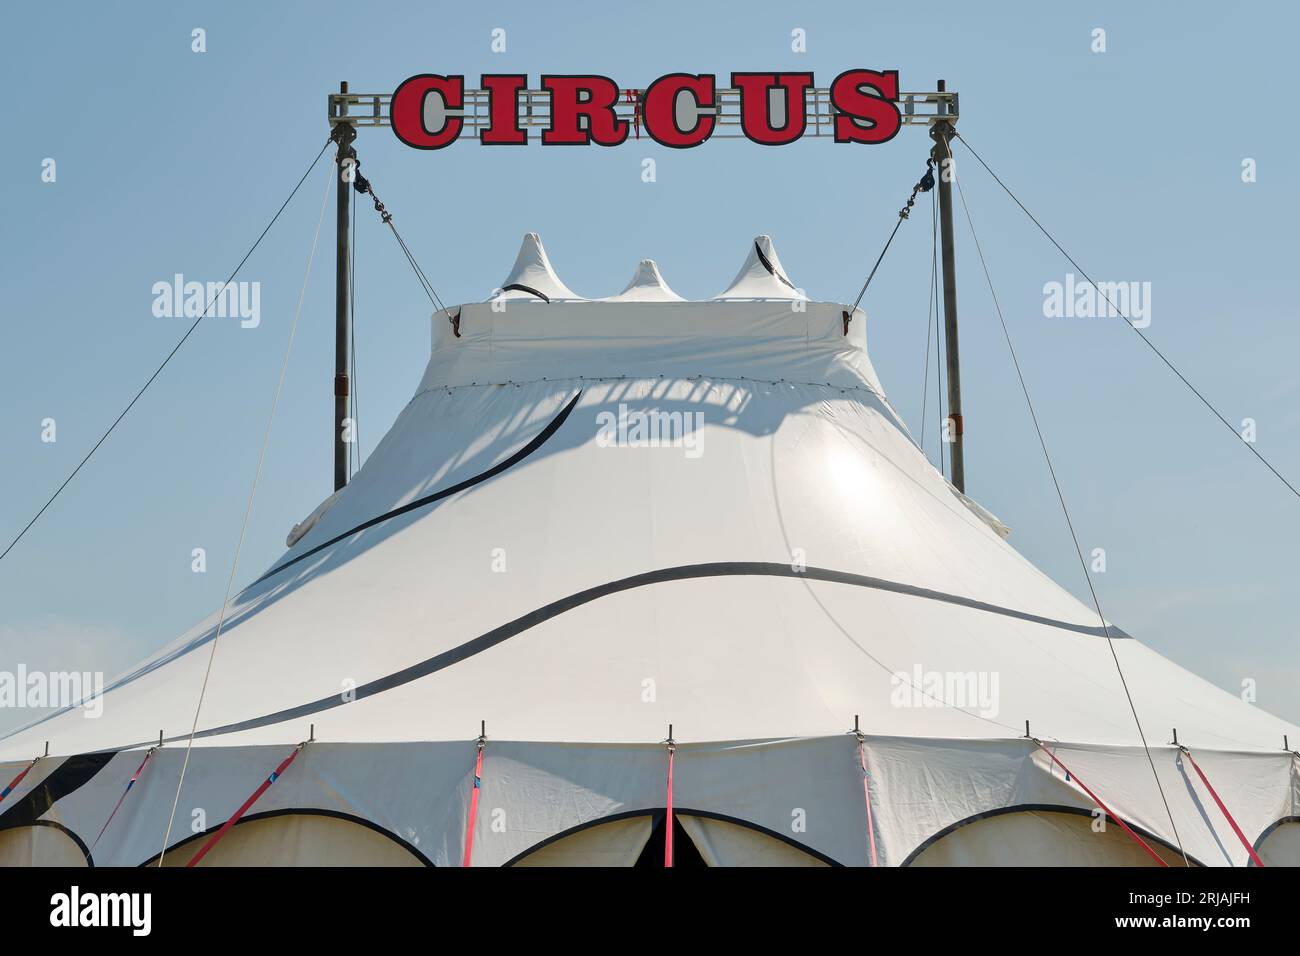 Small white circus tent with red characters against a blue sky. Stock Photo